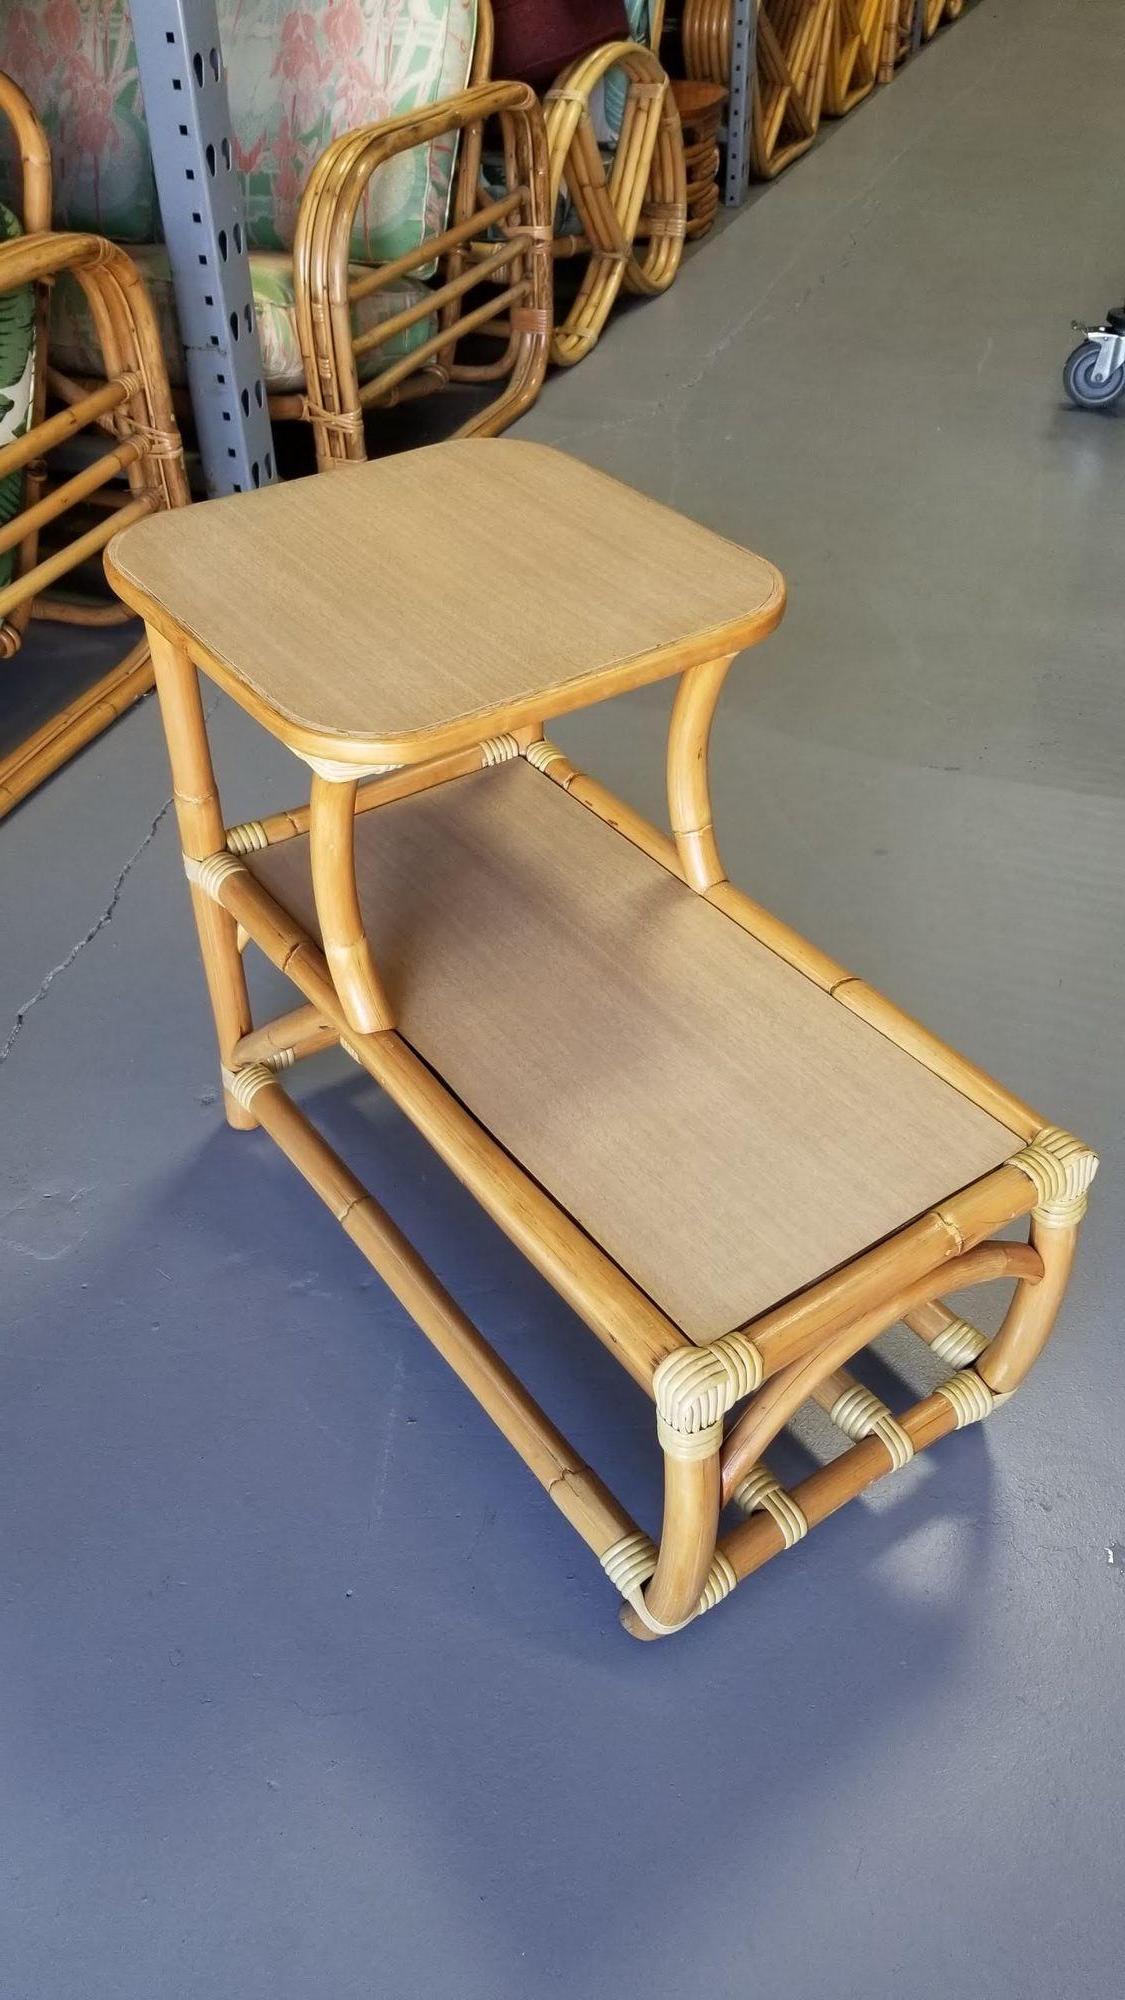 20th Century Restored Rattan Side Table 2-Tier w/ Formica Top, Set of 2 For Sale